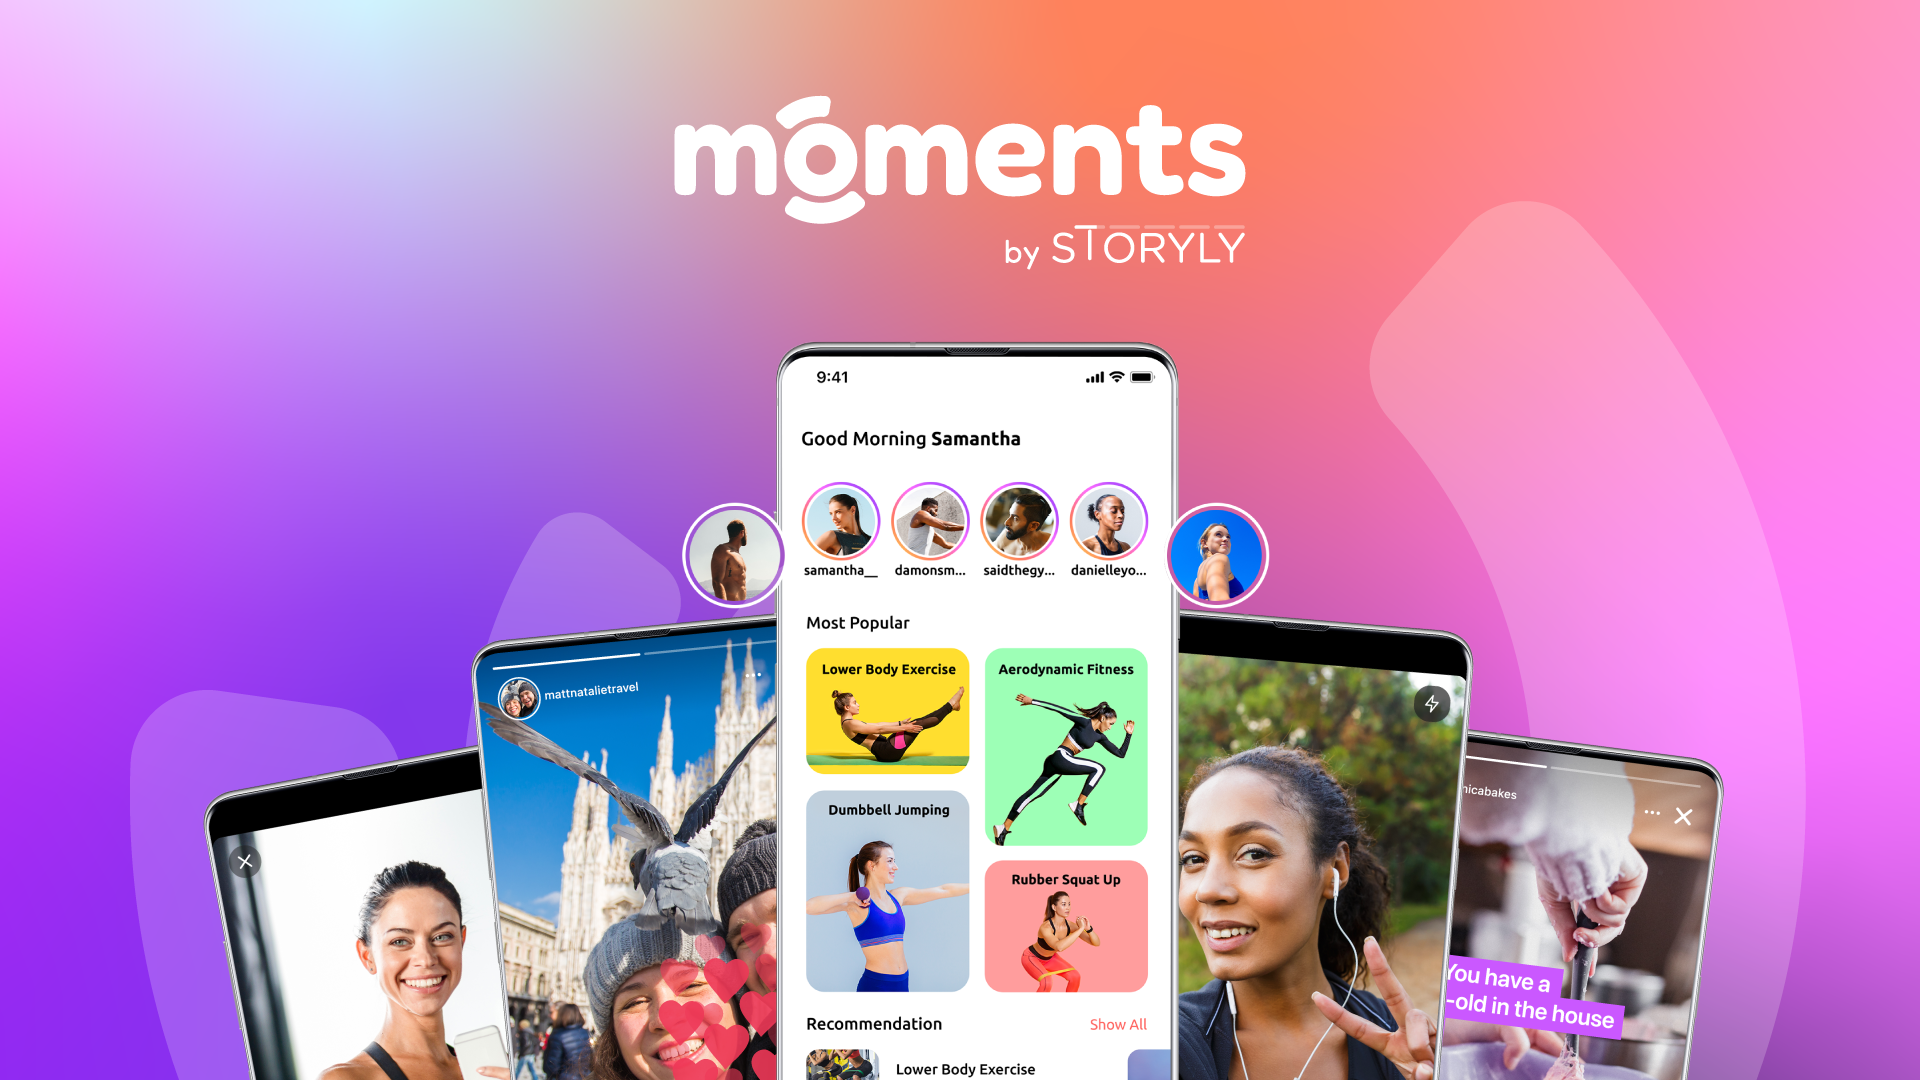 Moments by Storyly turns individual users into creators via user-generated Stories and enables brands to build  in-app communities